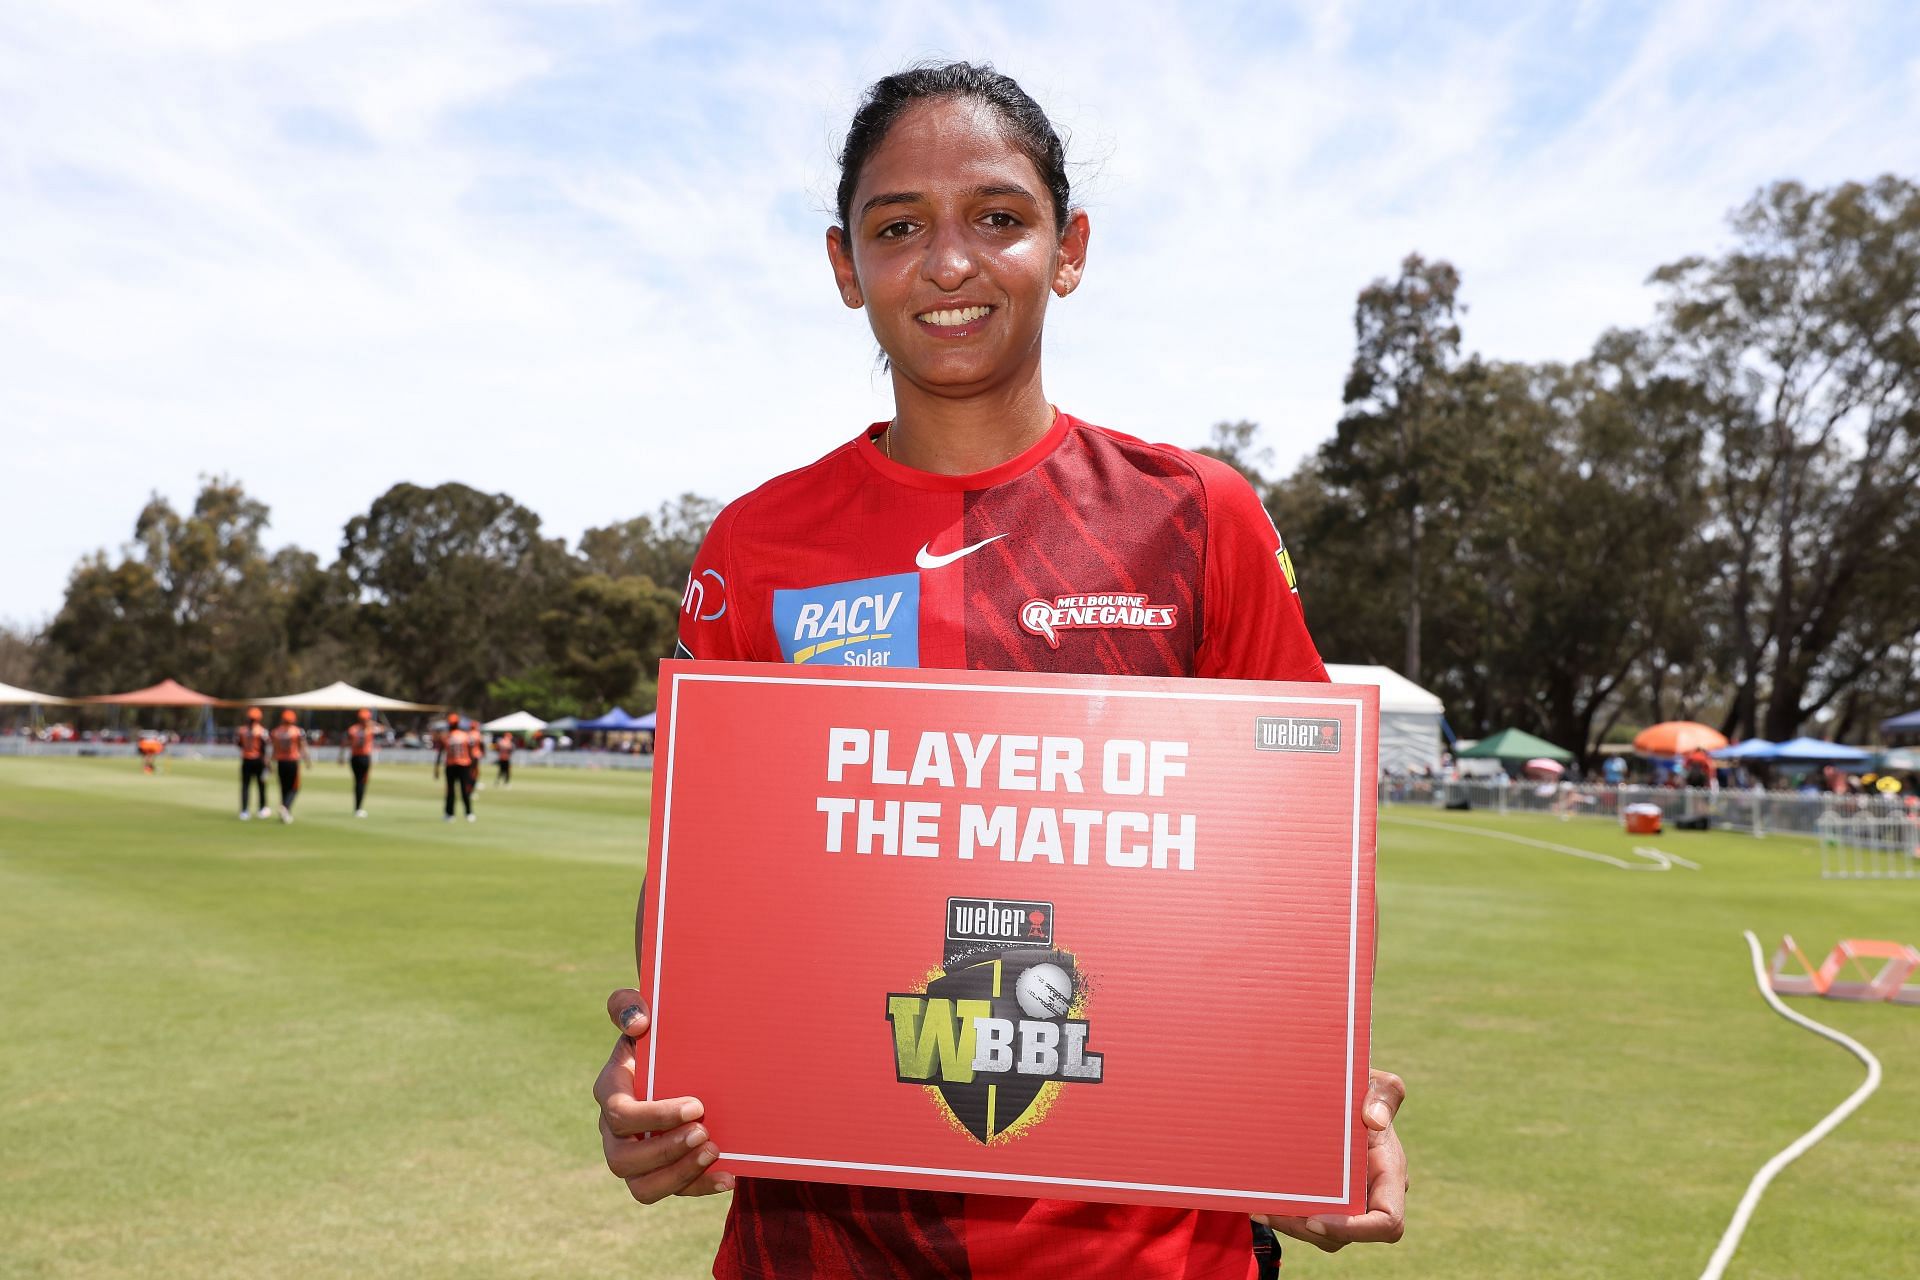 Harmanpreet Kaur in WBBL|07. (Image source: Getty Images)